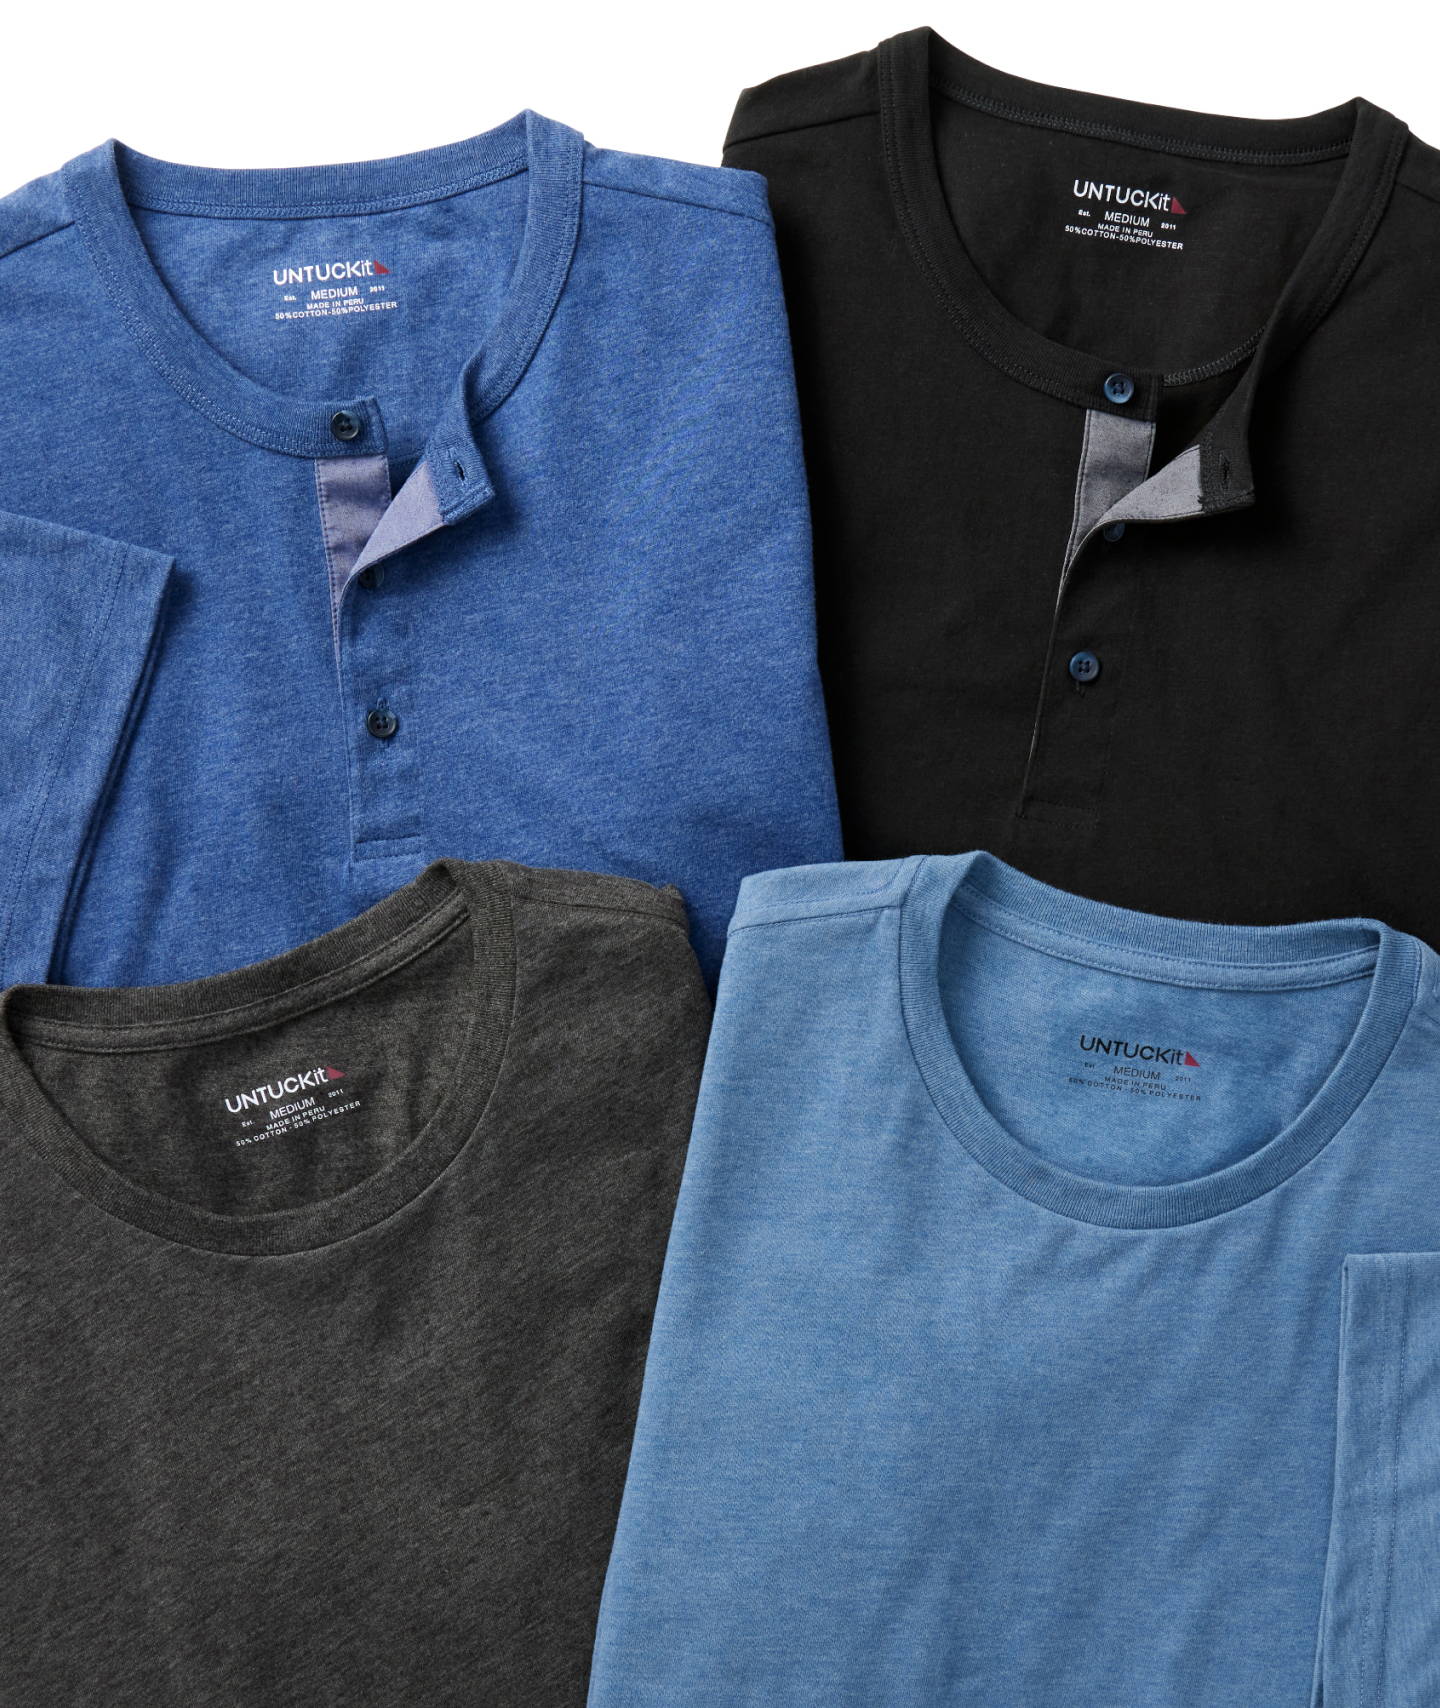 Collection of UNTUCKit Tees and Henleys in various colors. 